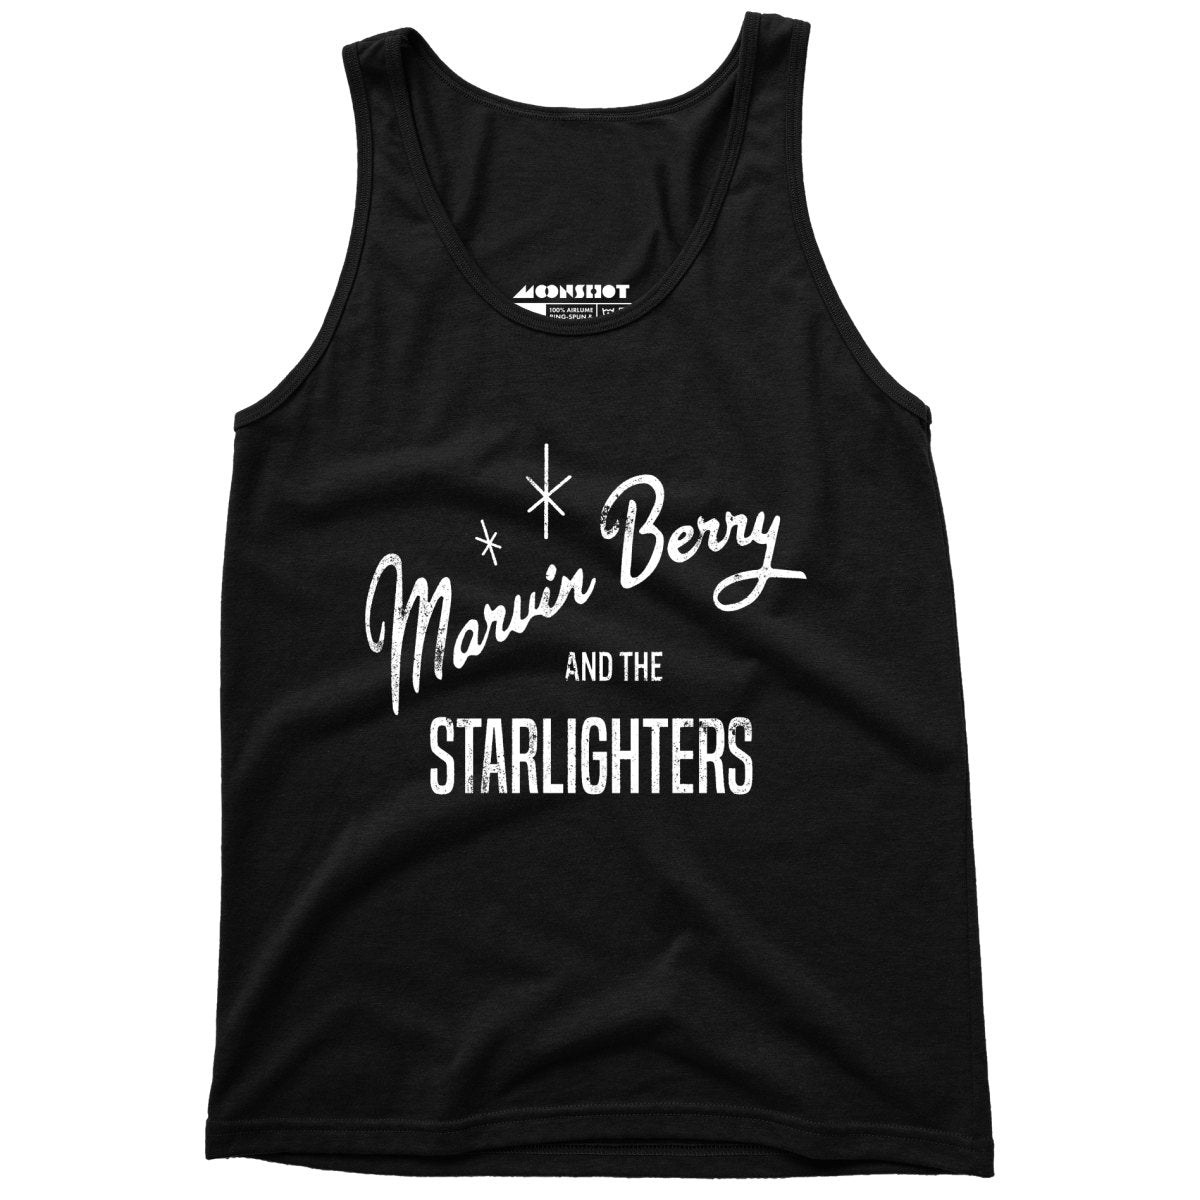 Marvin Berry and The Starlighters - Unisex Tank Top